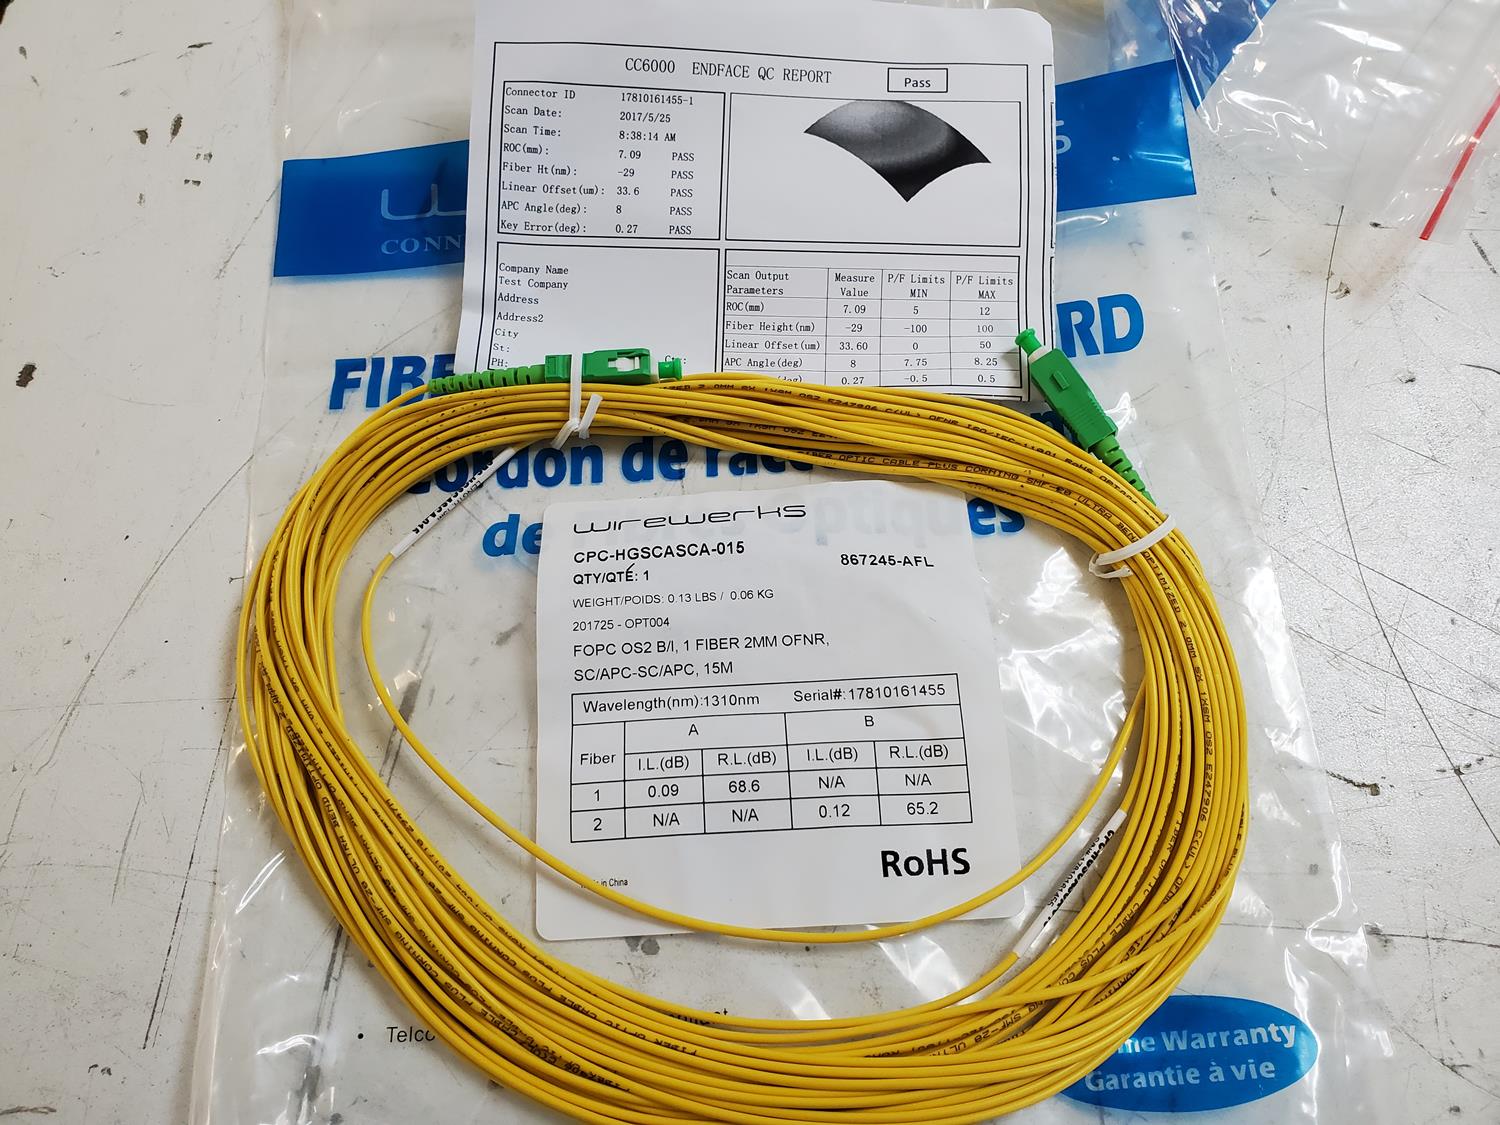 Similar product is AccuSource SC/APC patchcord lot